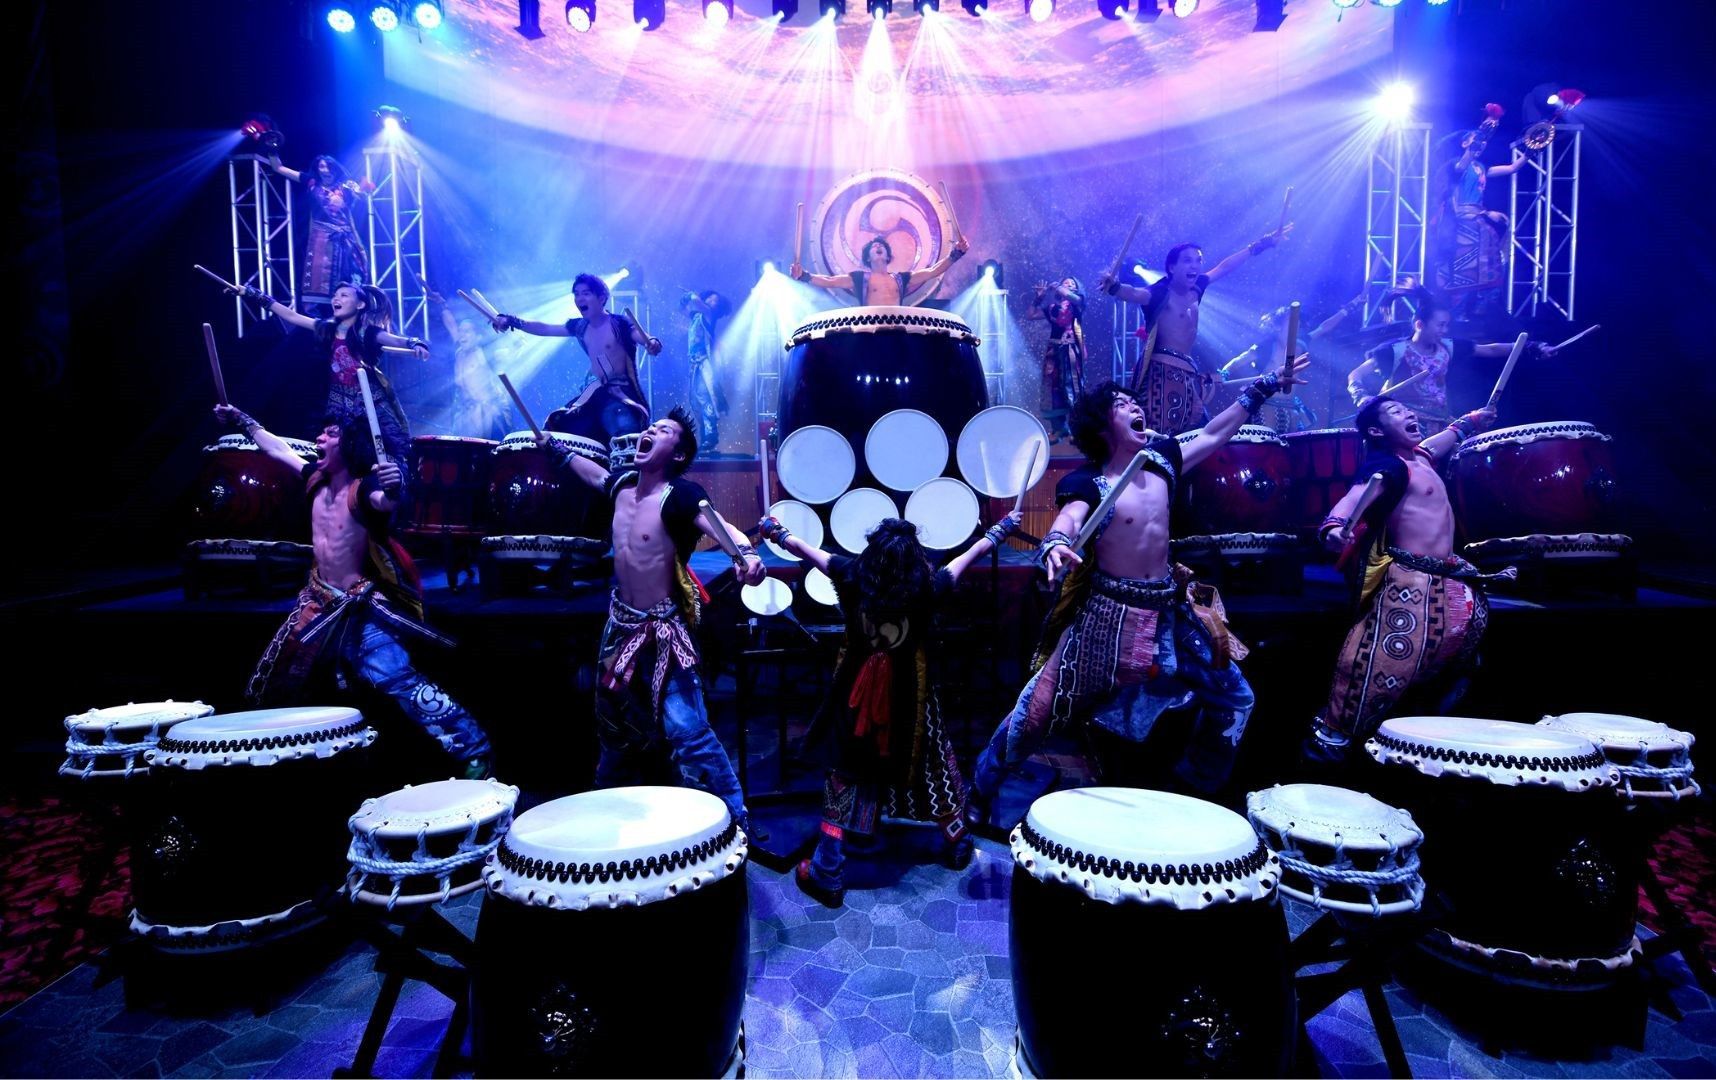 How to get tickets to Taiko drum group Yamato's free Manila, Davao shows